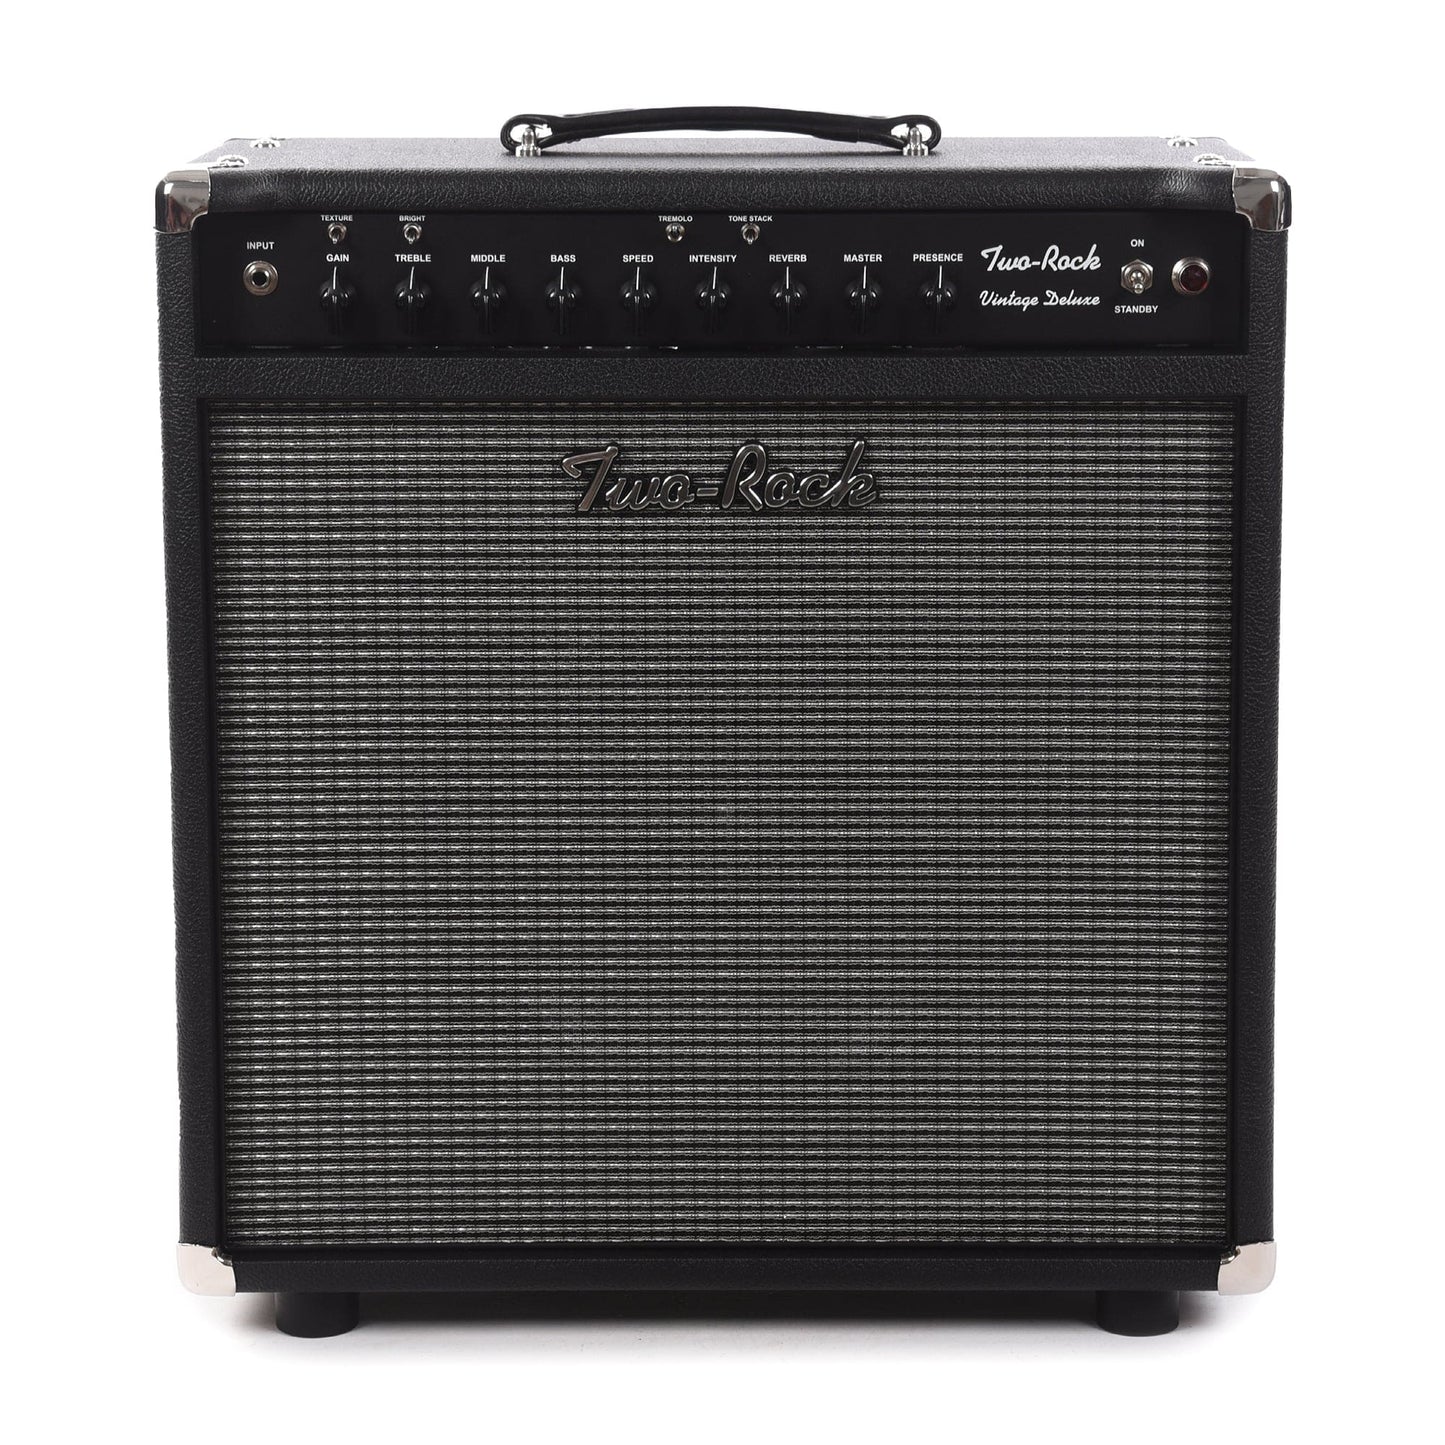 Two Rock Vintage Deluxe 35w 1x12 Combo Amps / Guitar Combos